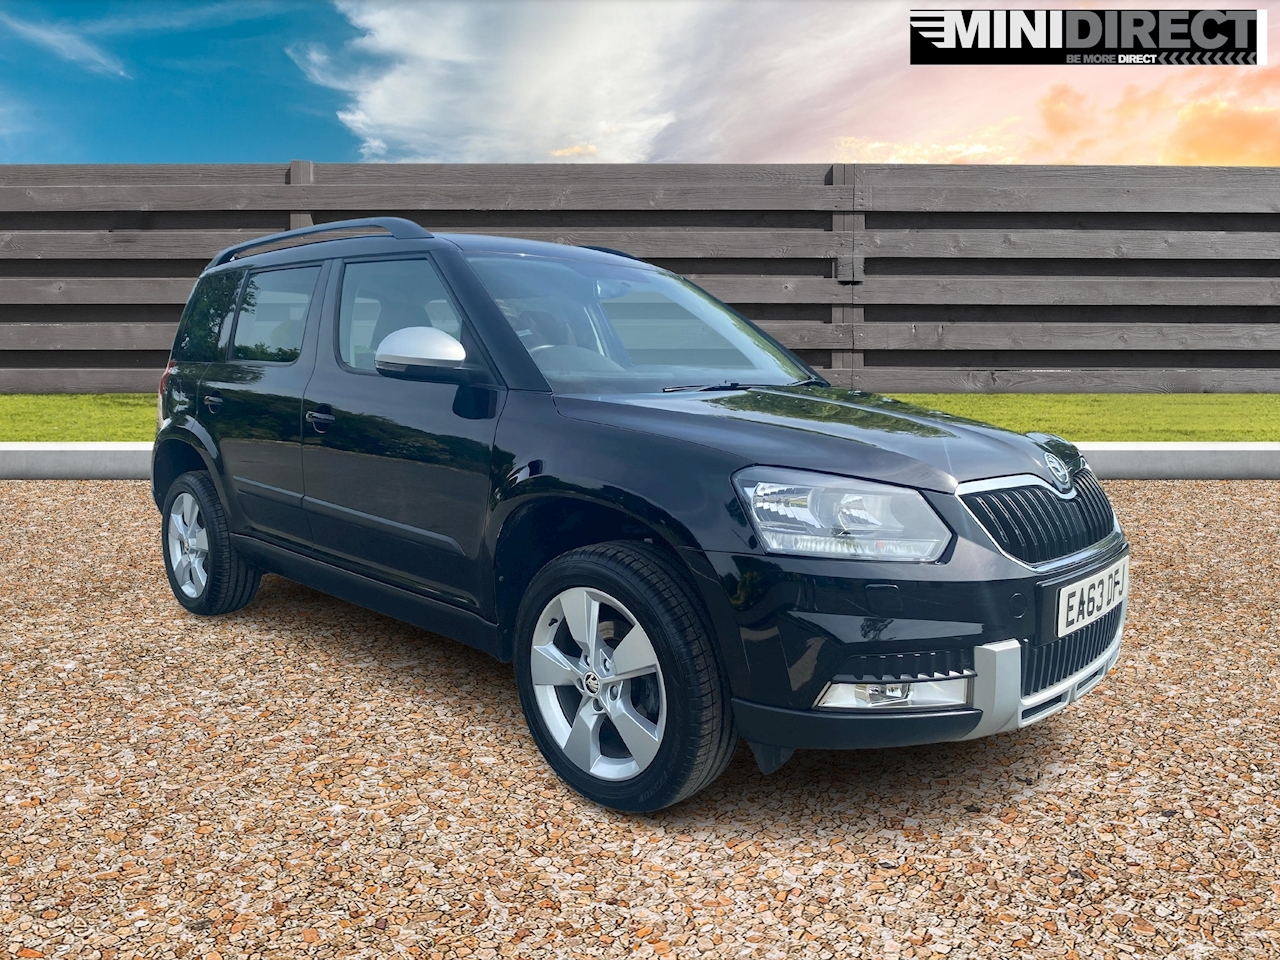 2.0 TDI SE Outdoor 5dr Diesel Manual 4WD Euro 5 (110 ps)